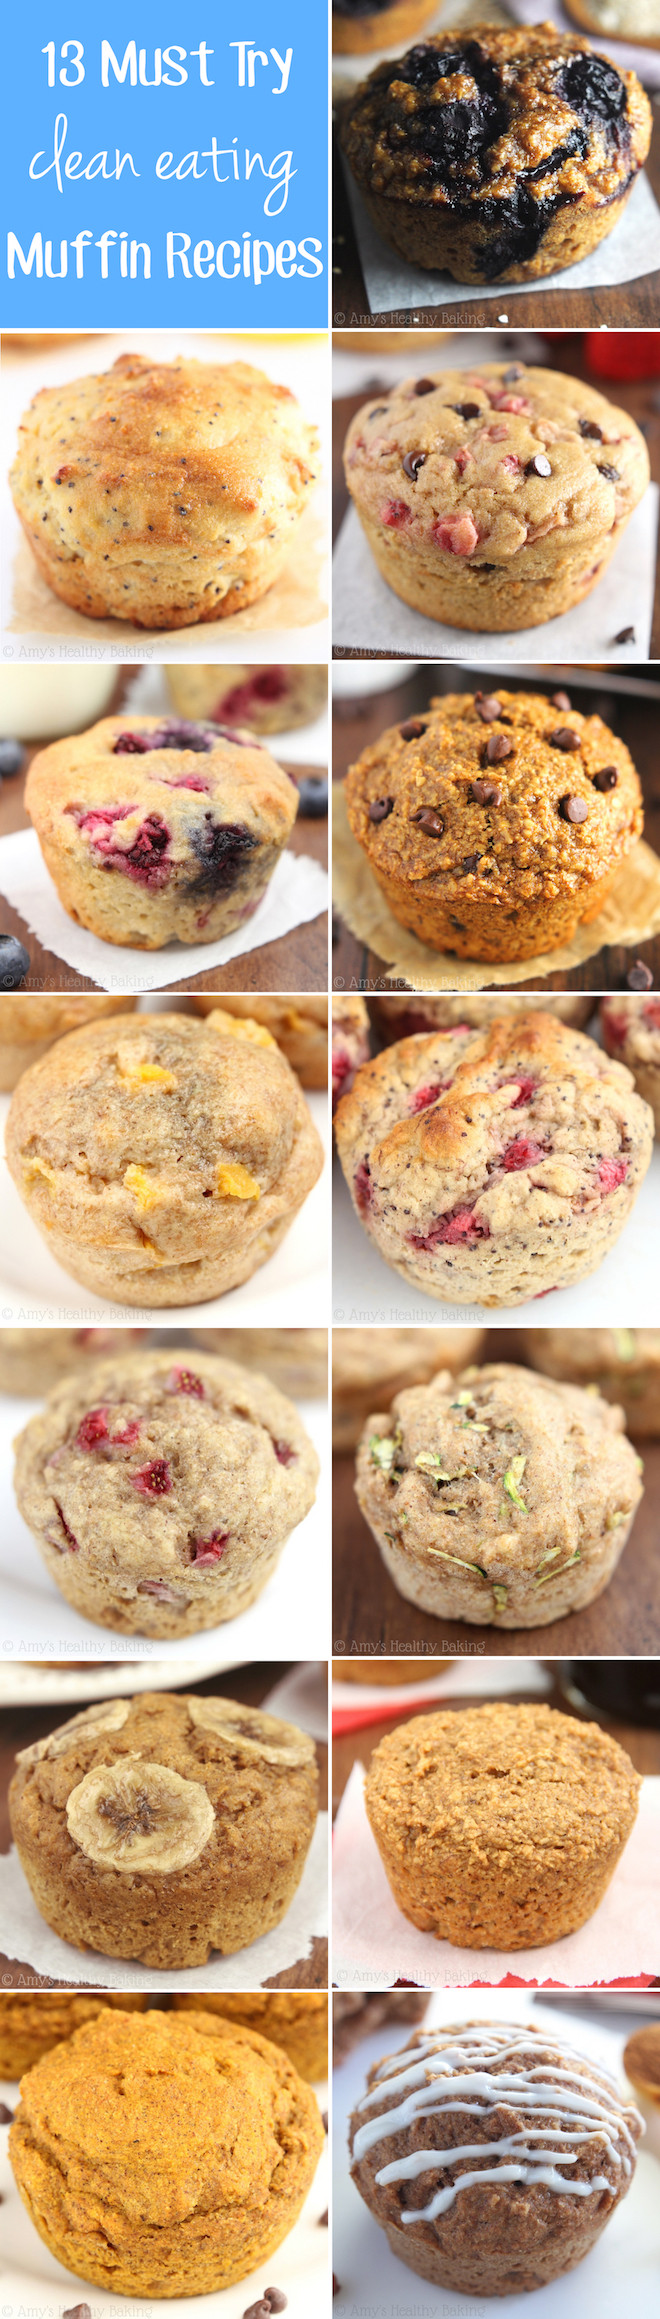 Clean Eating Muffins
 13 Must Try Clean Eating Muffin Recipes